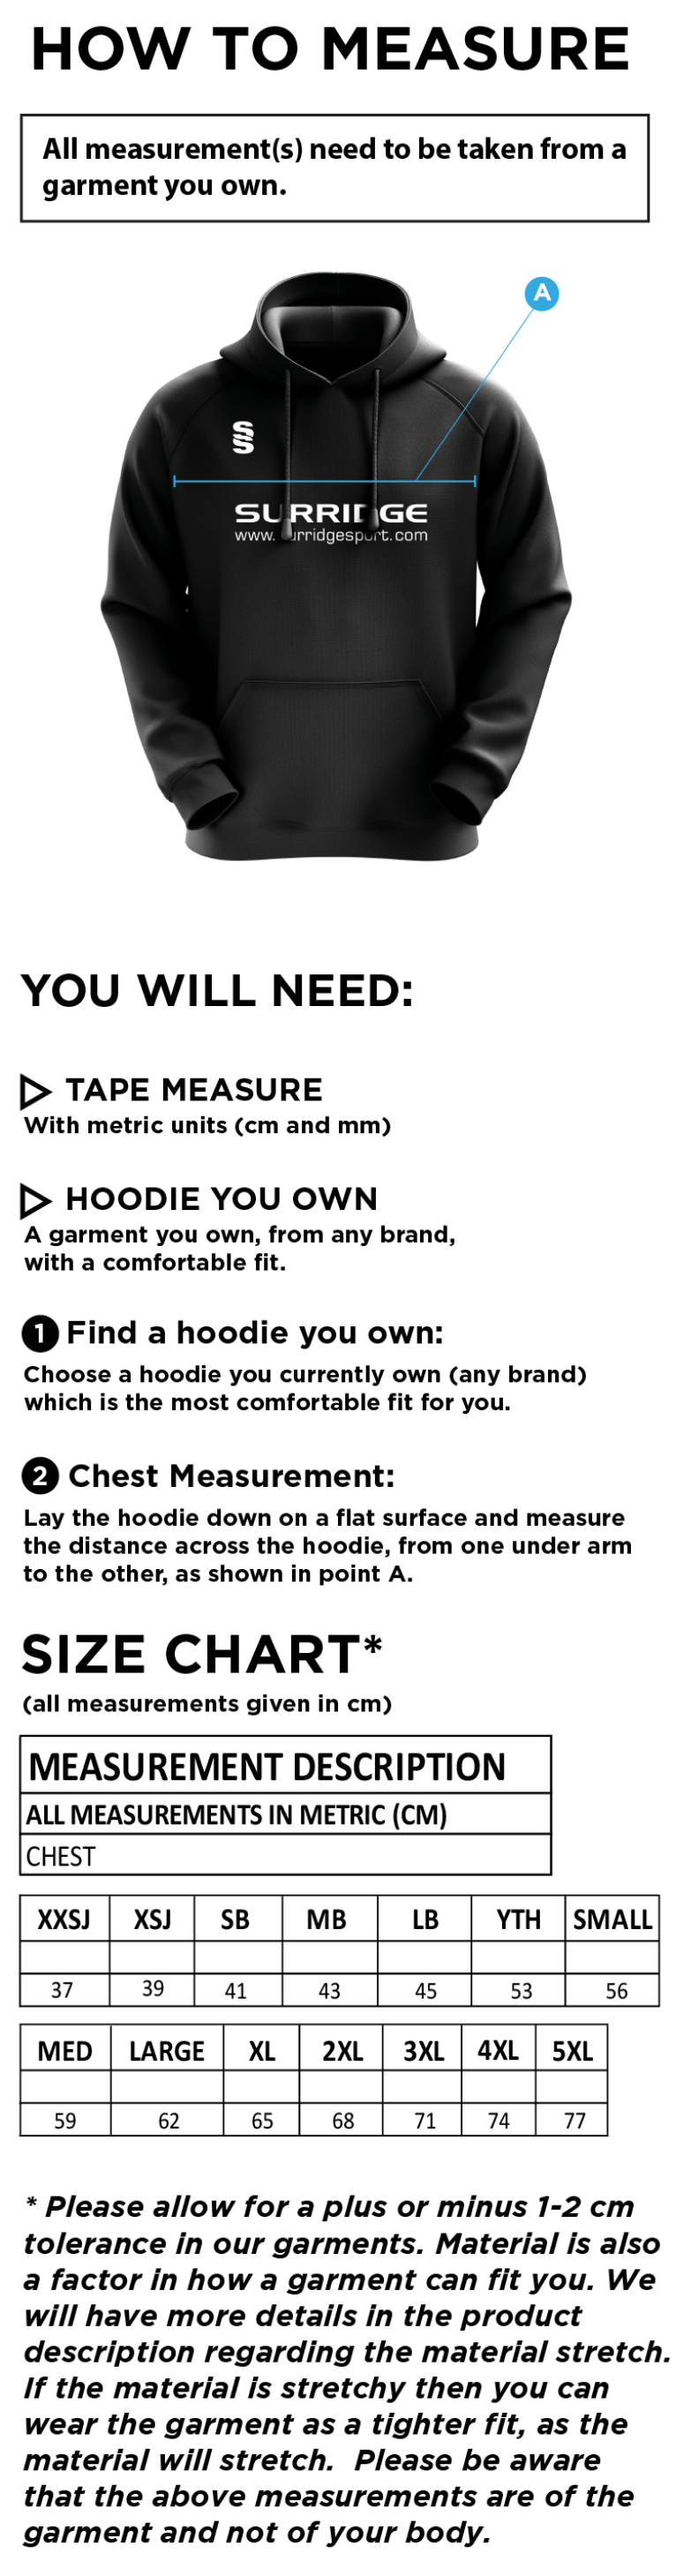 Durham College Society CC - Blade Hoody - Size Guide